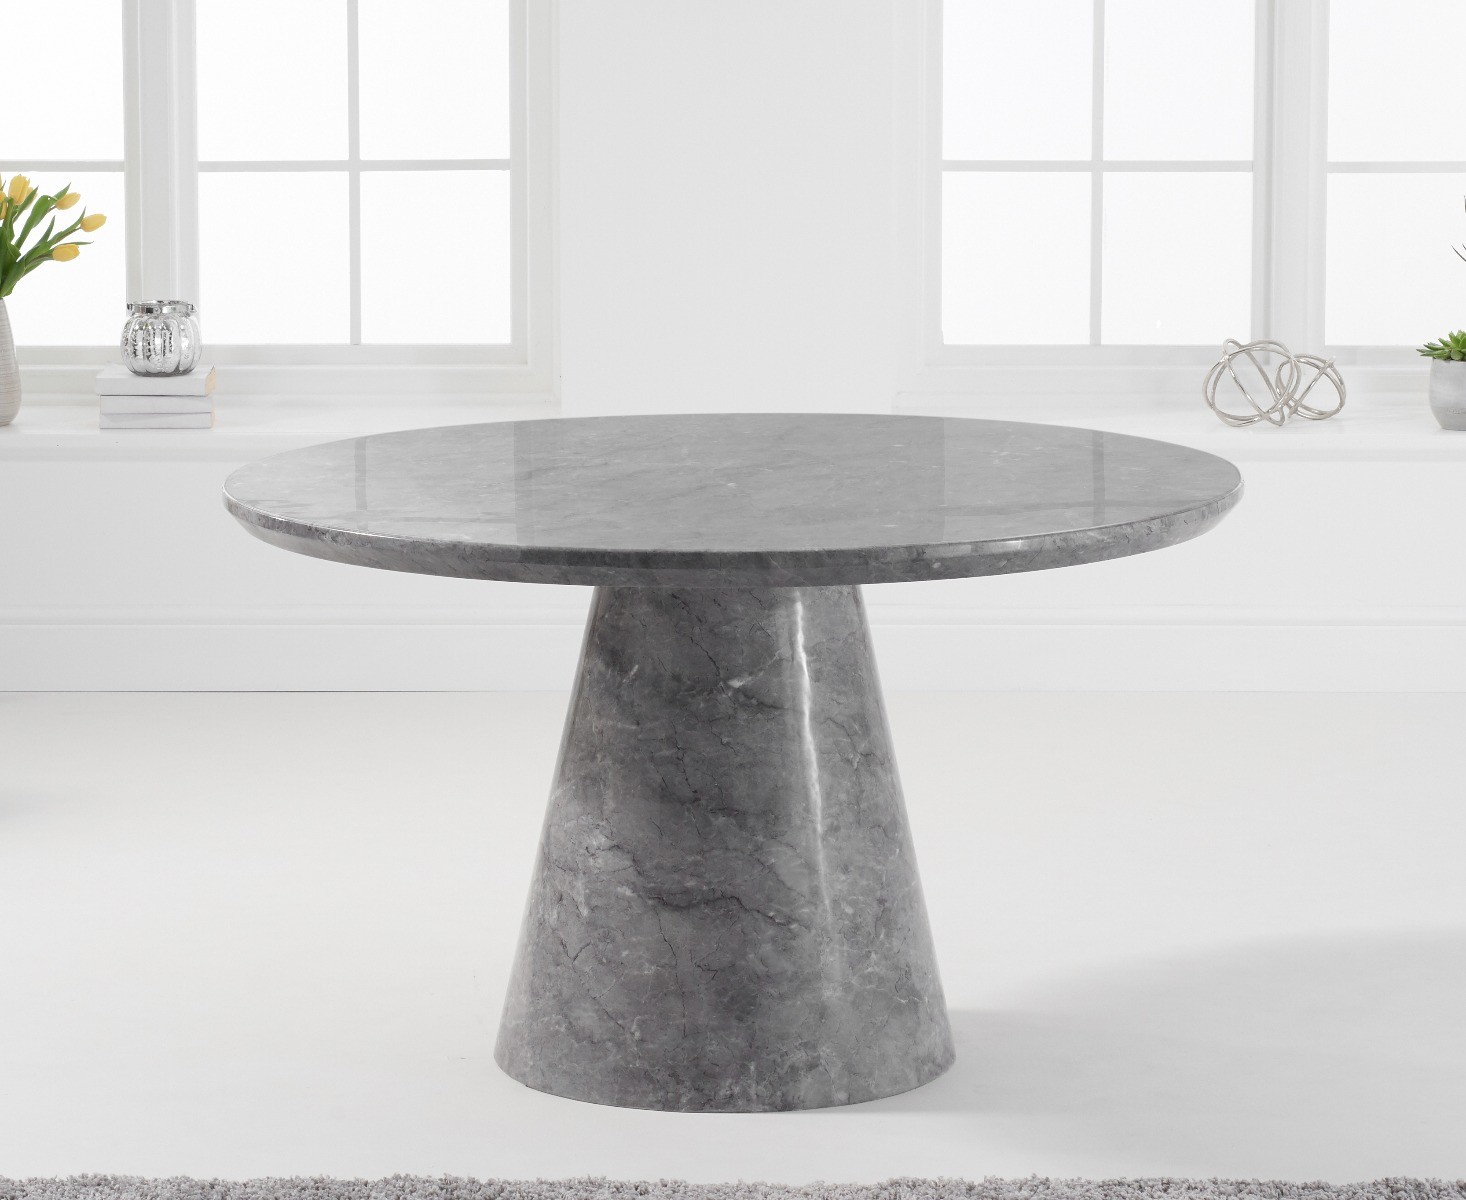 Photo 3 of Ravello 130cm round grey marble dining table with 4 cream francesca chairs